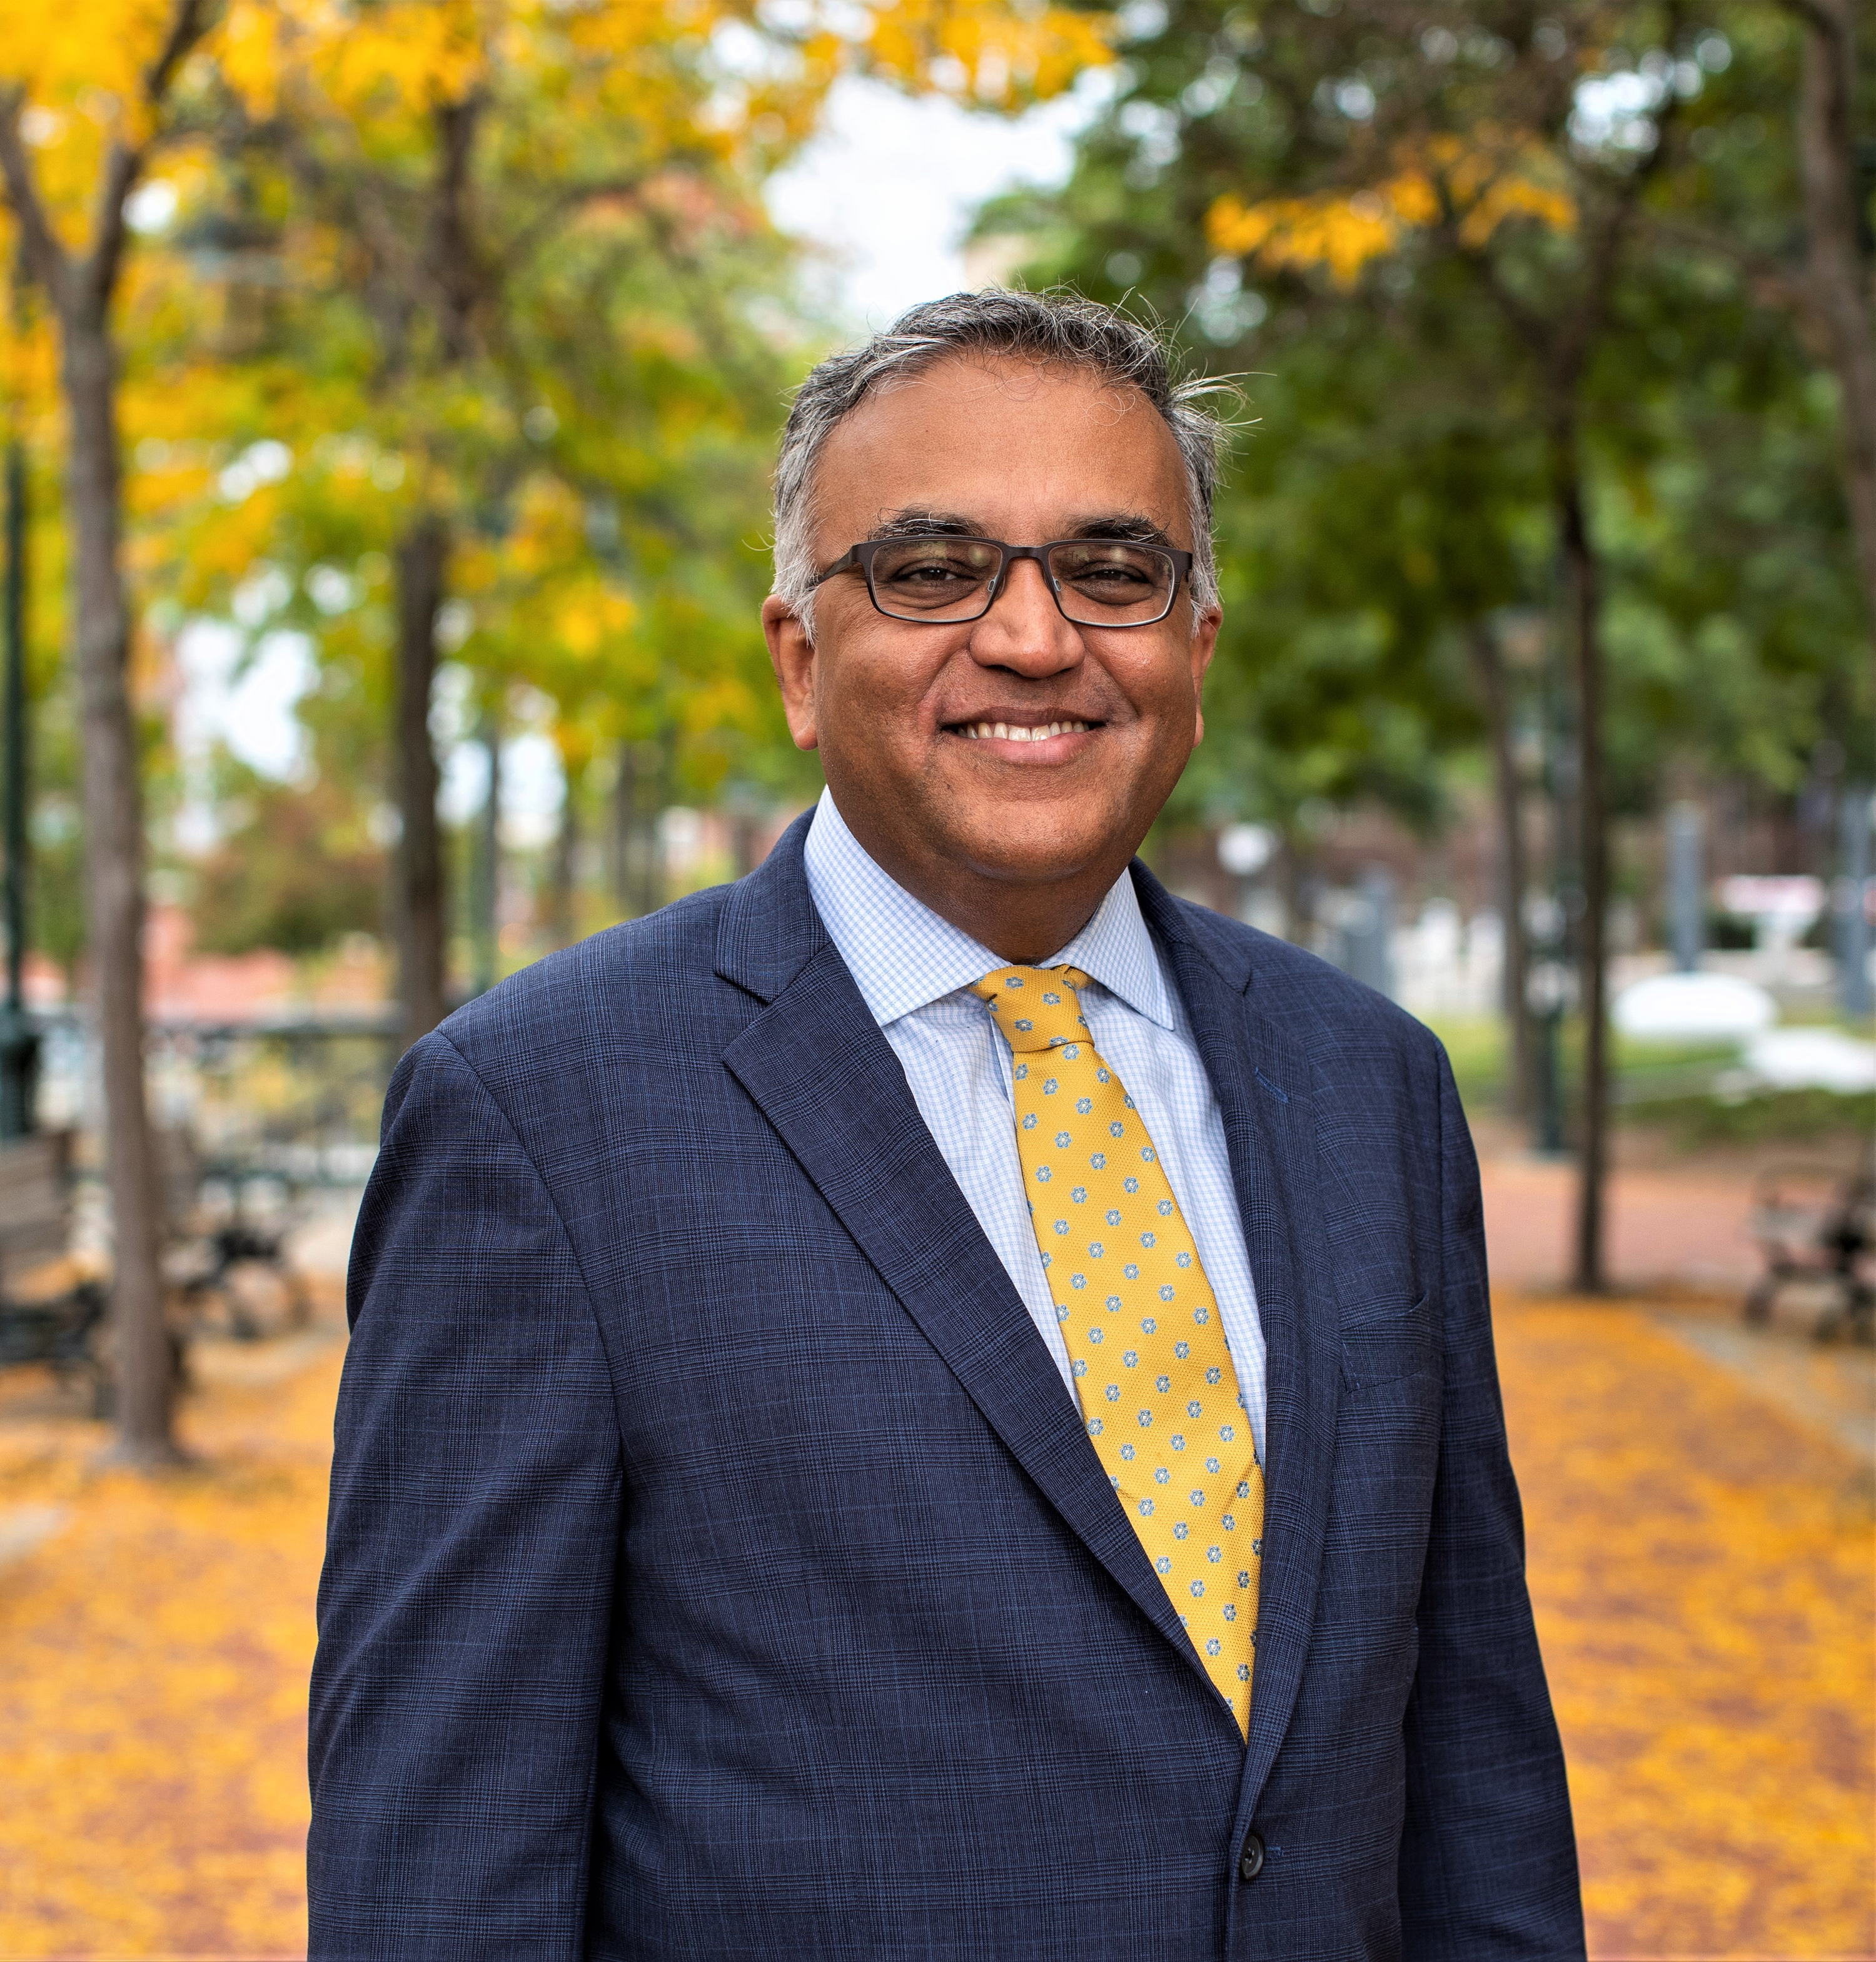 Welcome to Episode 33 of “COVID: What comes next,” an exclusive weekly Providence Journal/USA TODAY NETWORK podcast featuring Dr. Ashish Jha, dean of the Brown University School of Public Health and an internationally respected expert on pandemic response and preparedness